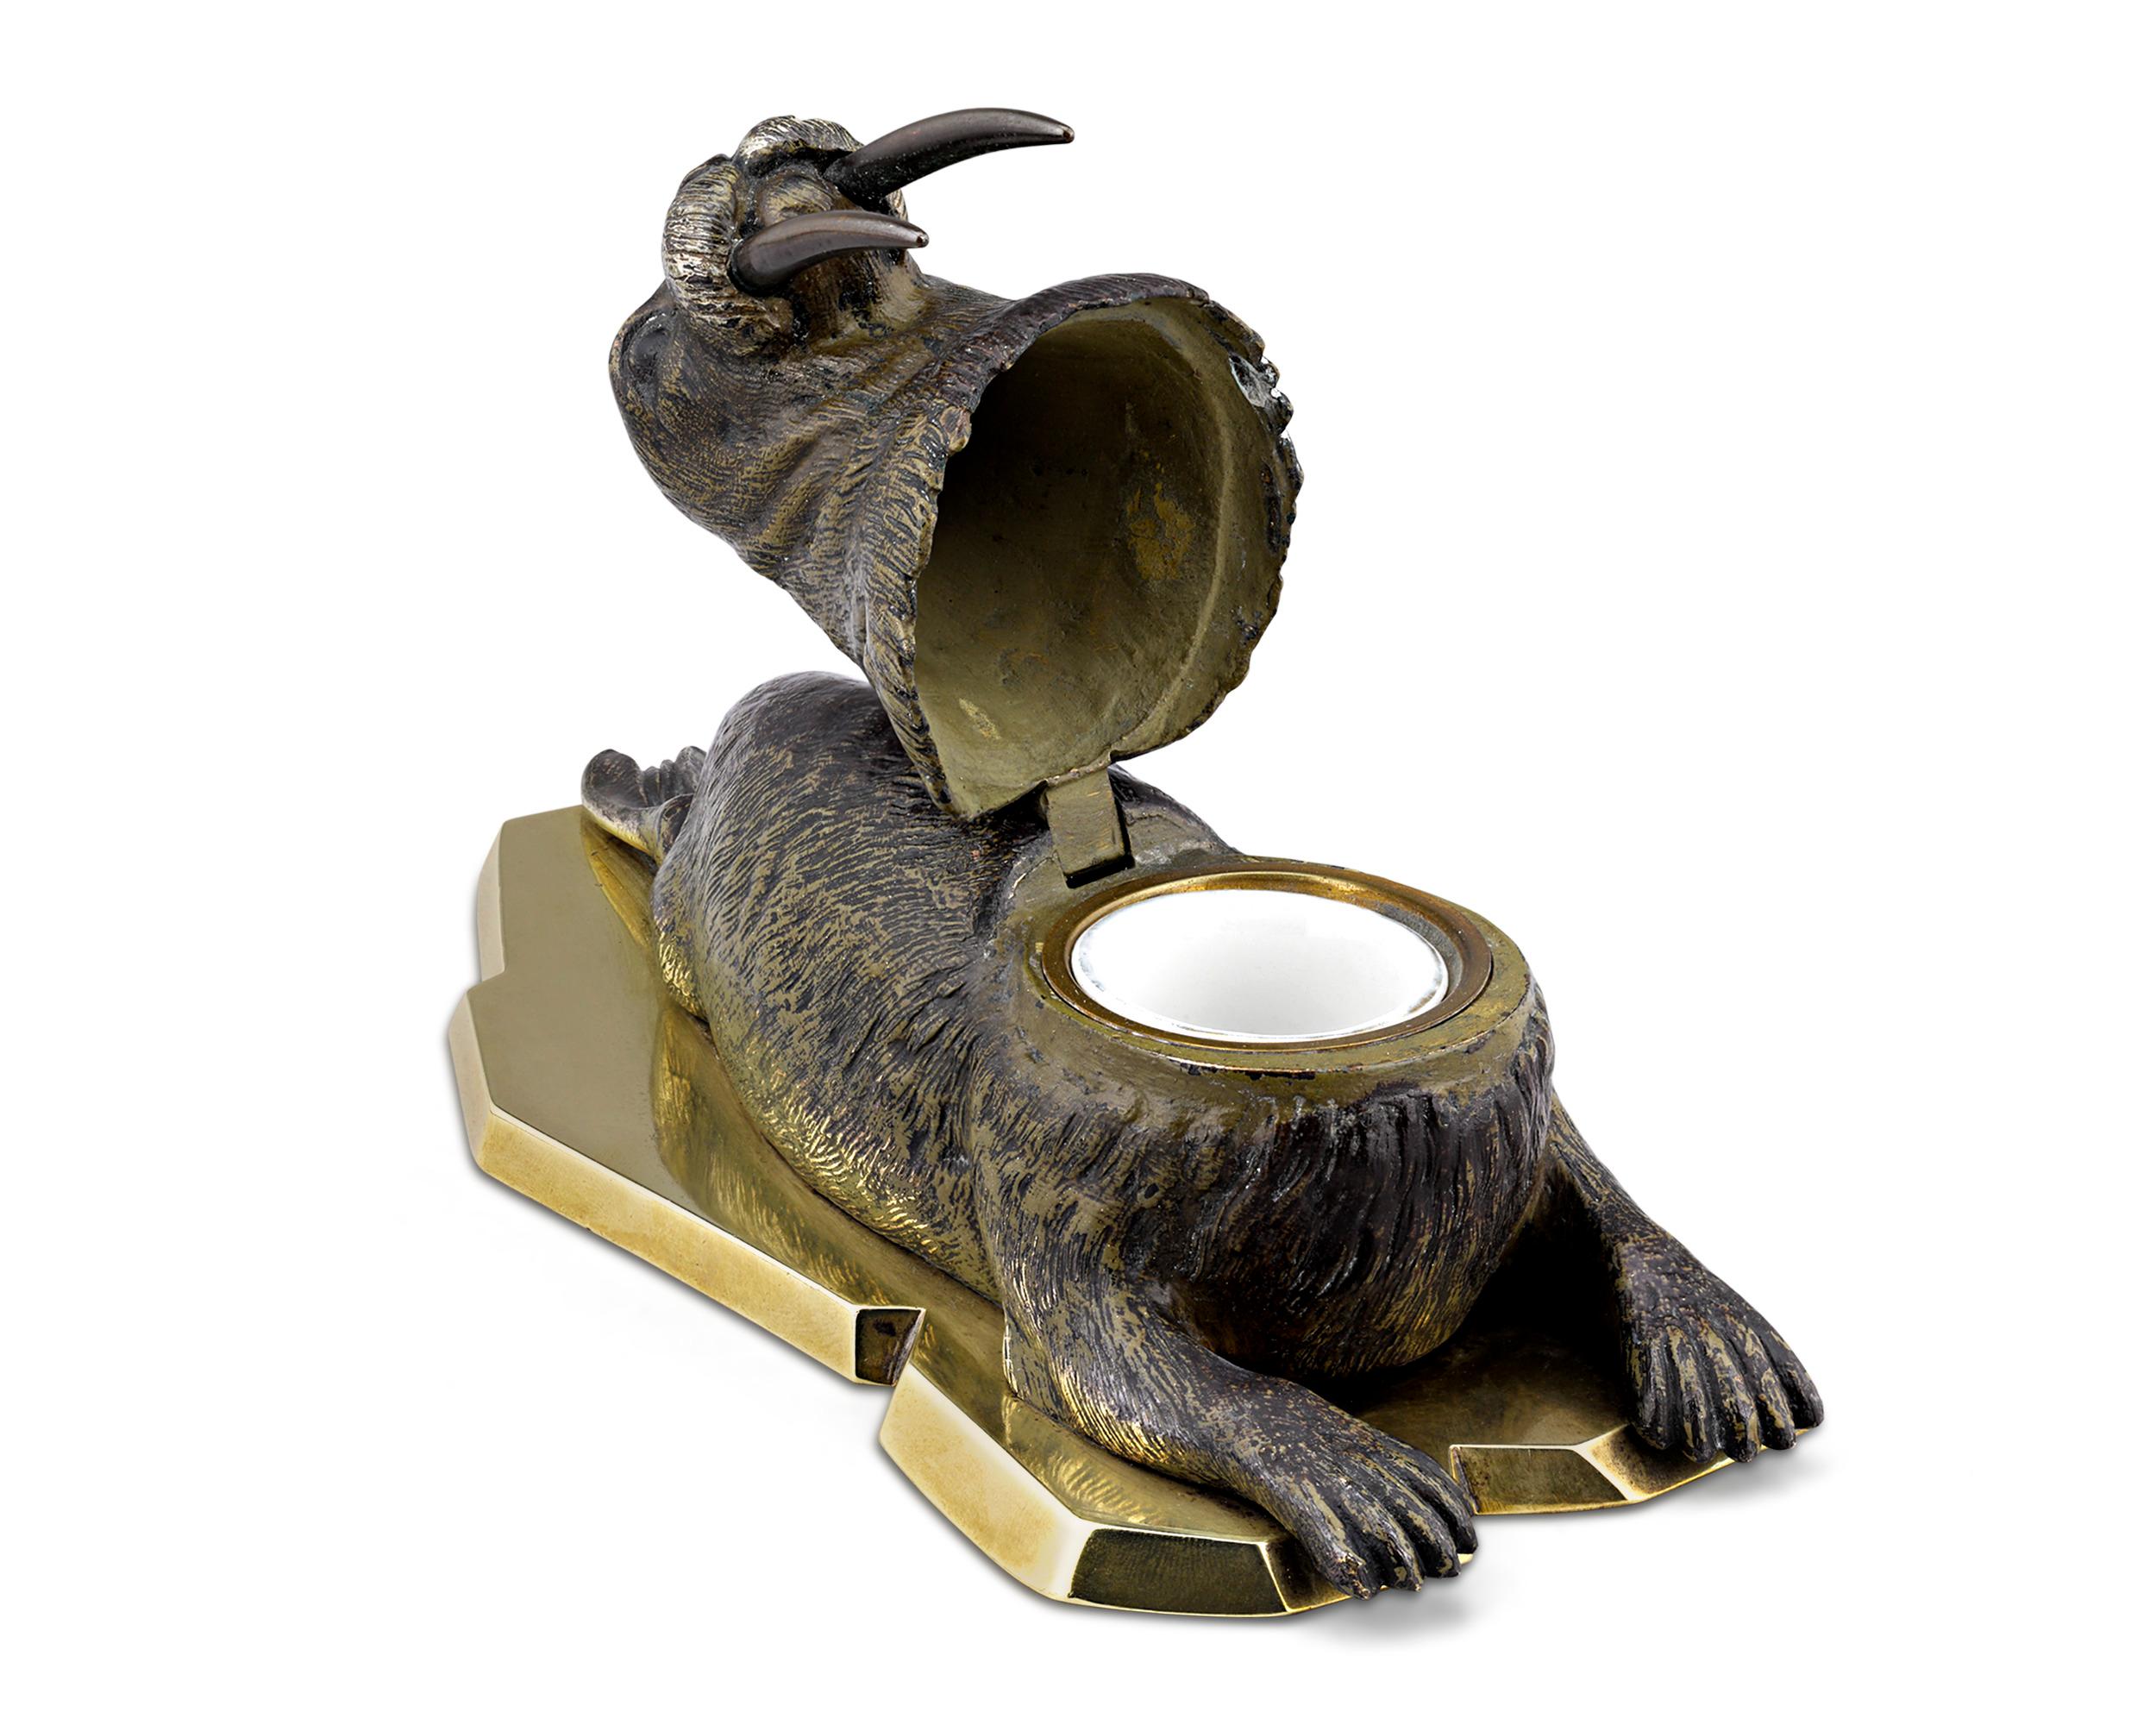 Wonderfully charming and boasting a high level of detail, this bronze walrus also serves as an inkwell. The incredible artistry of Viennese bronze work is on display in this delightful figure, with its mighty tusks, exquisitely detailed coat, and